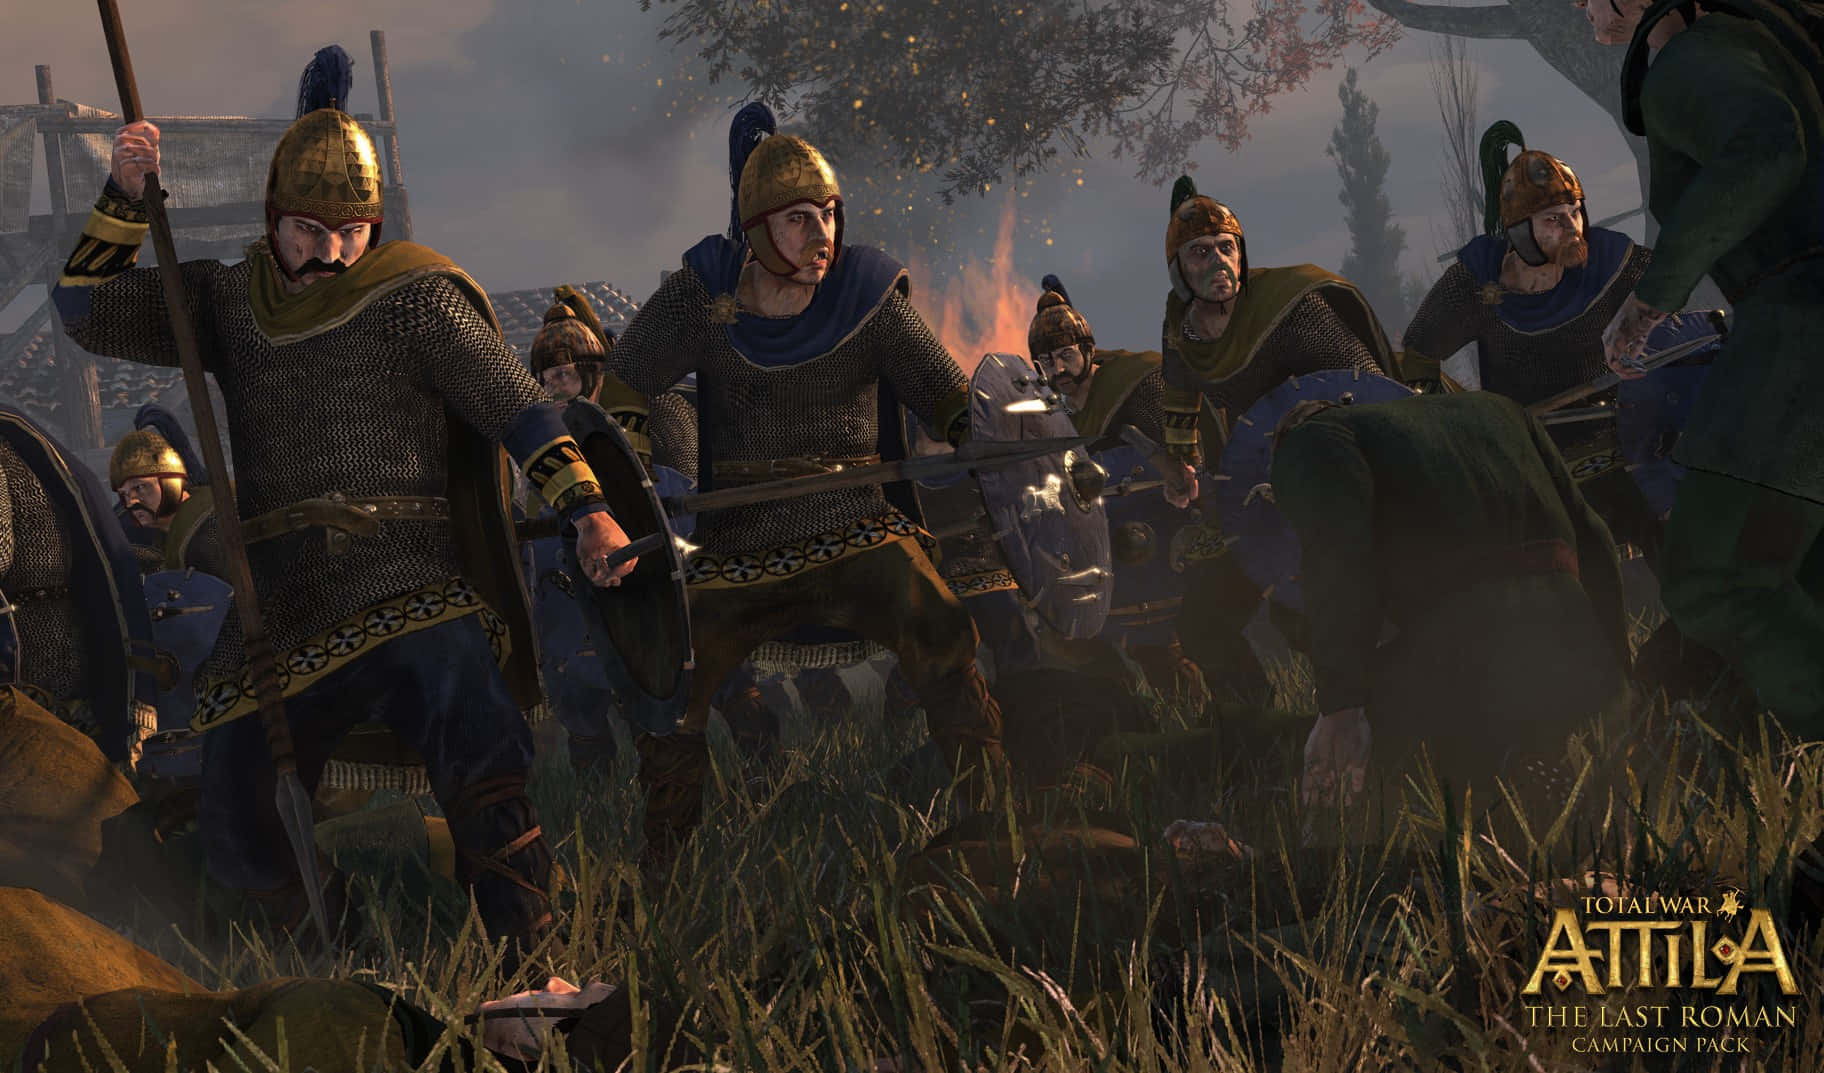 Lead the Warring Tribes of Total War Attila